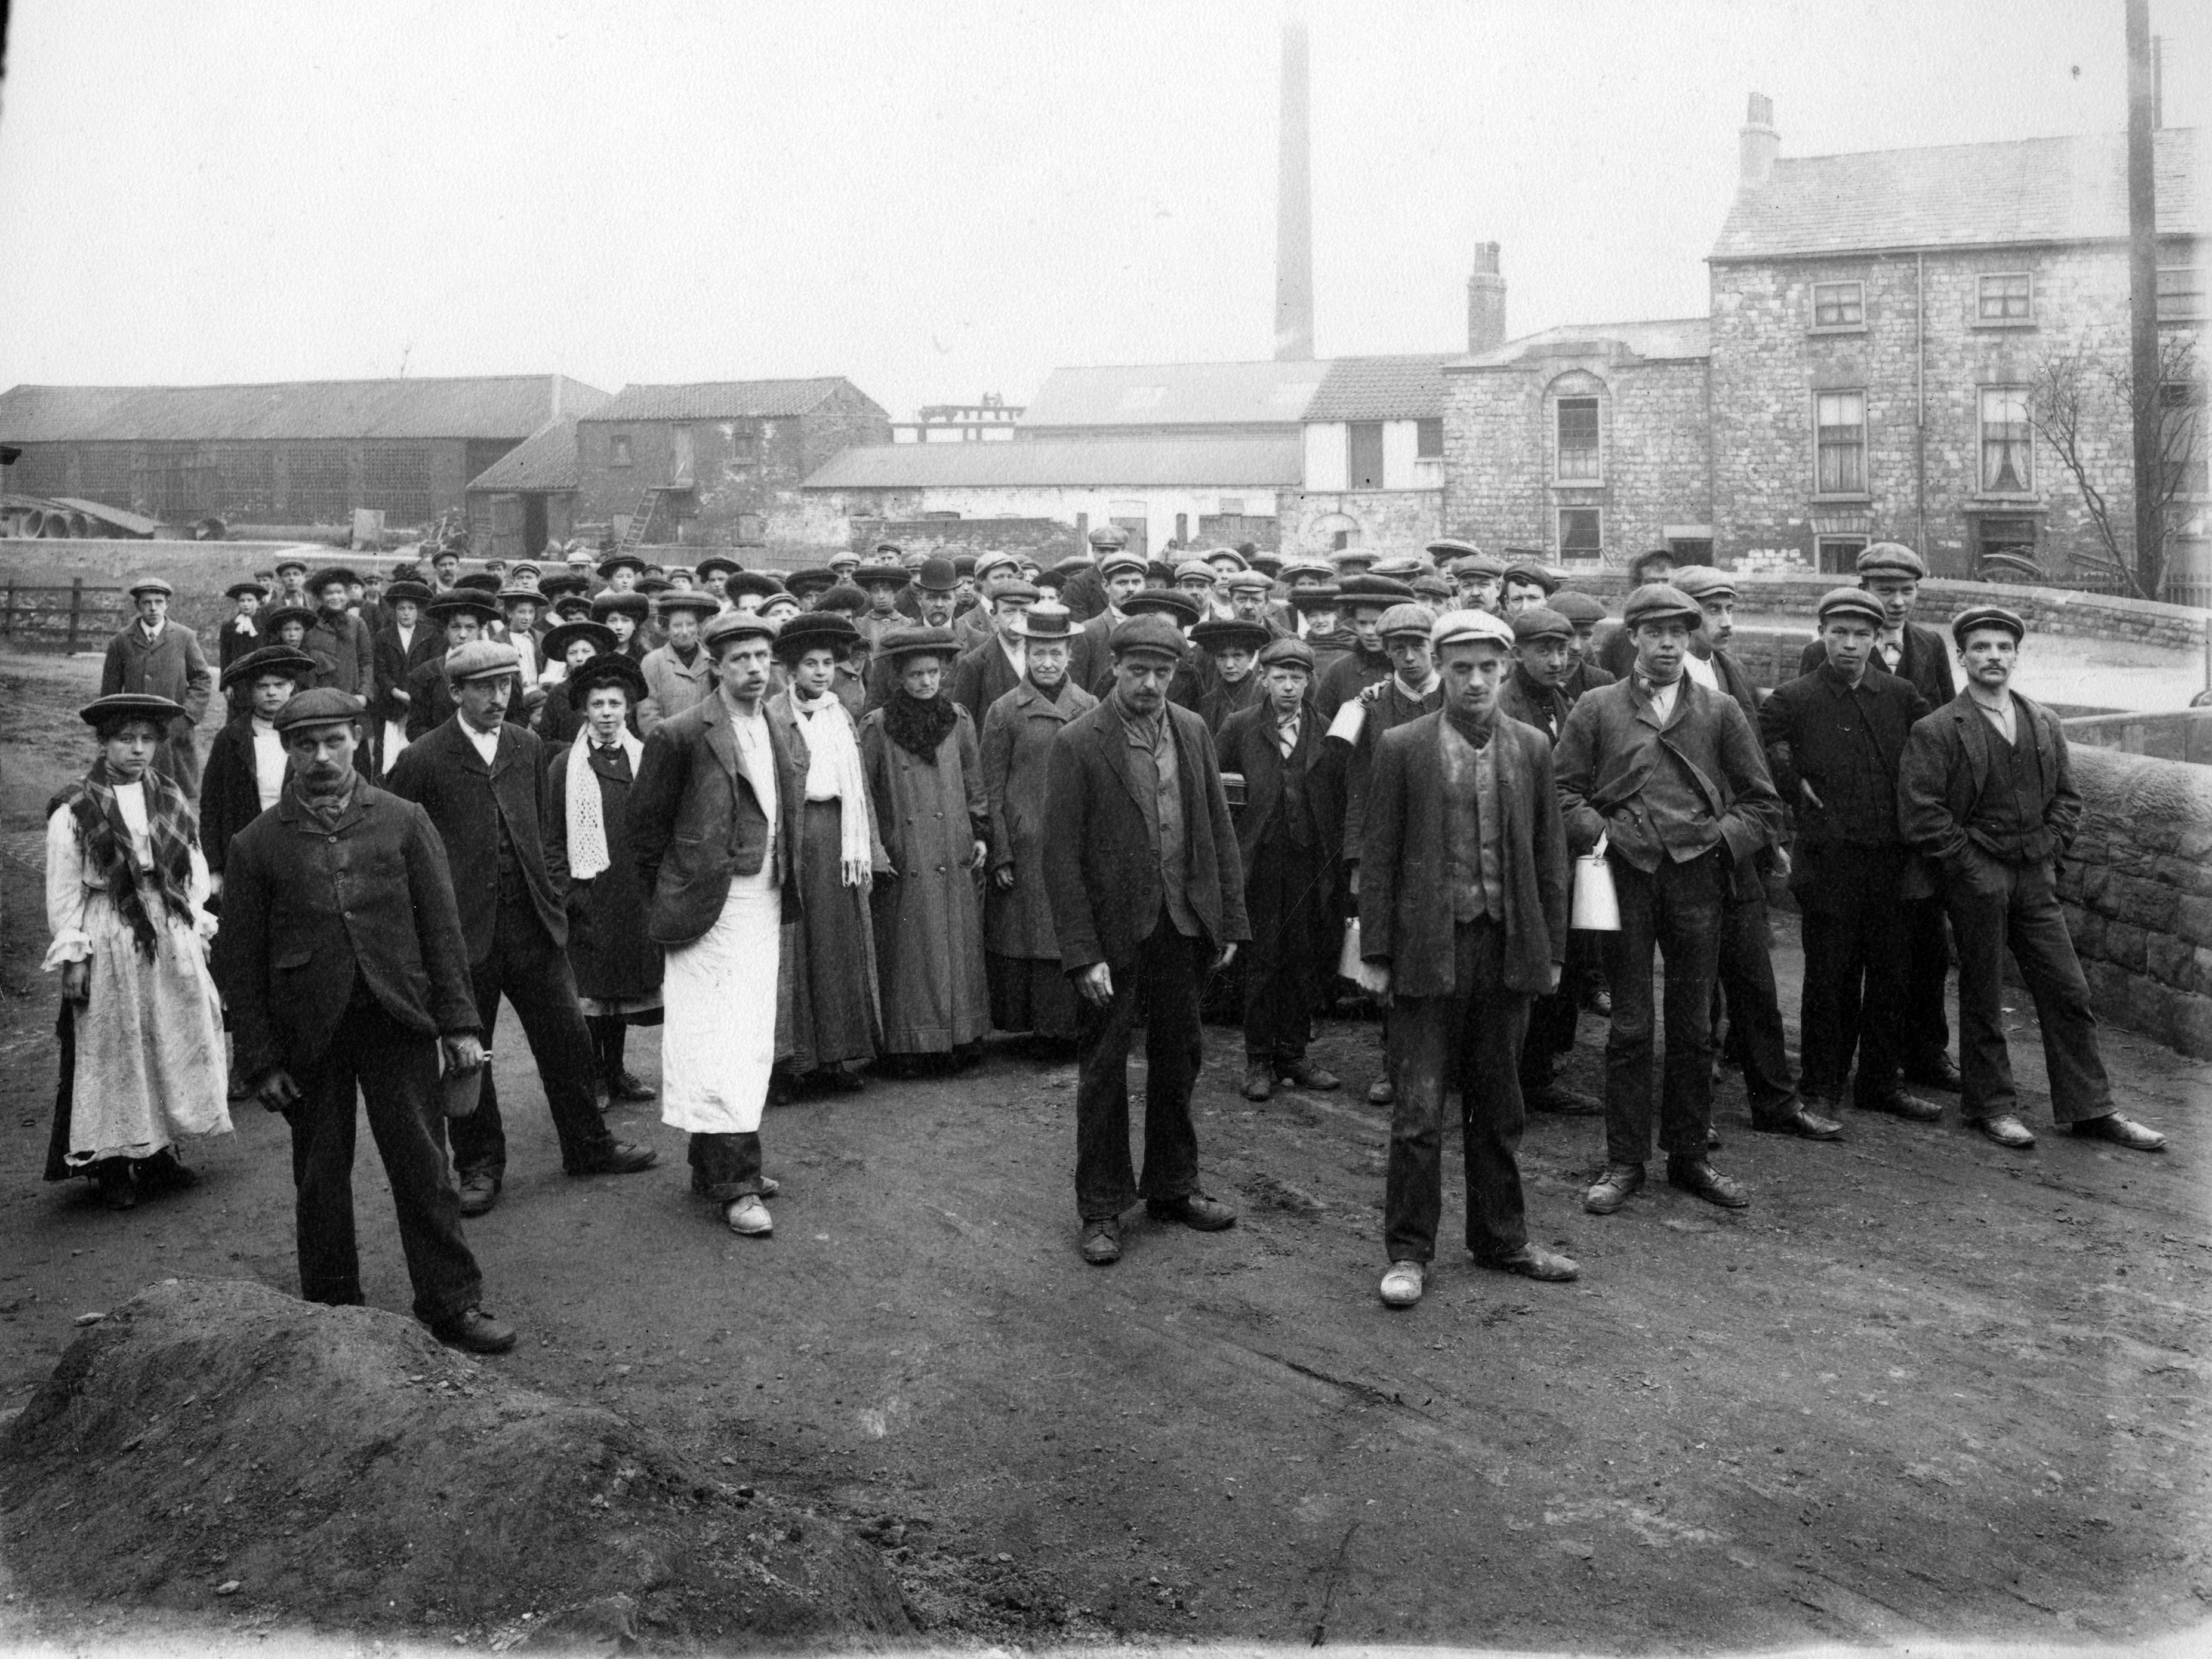 Victoria Mustard workers, 1880s. Courtesy of Doncaster Heritage Services